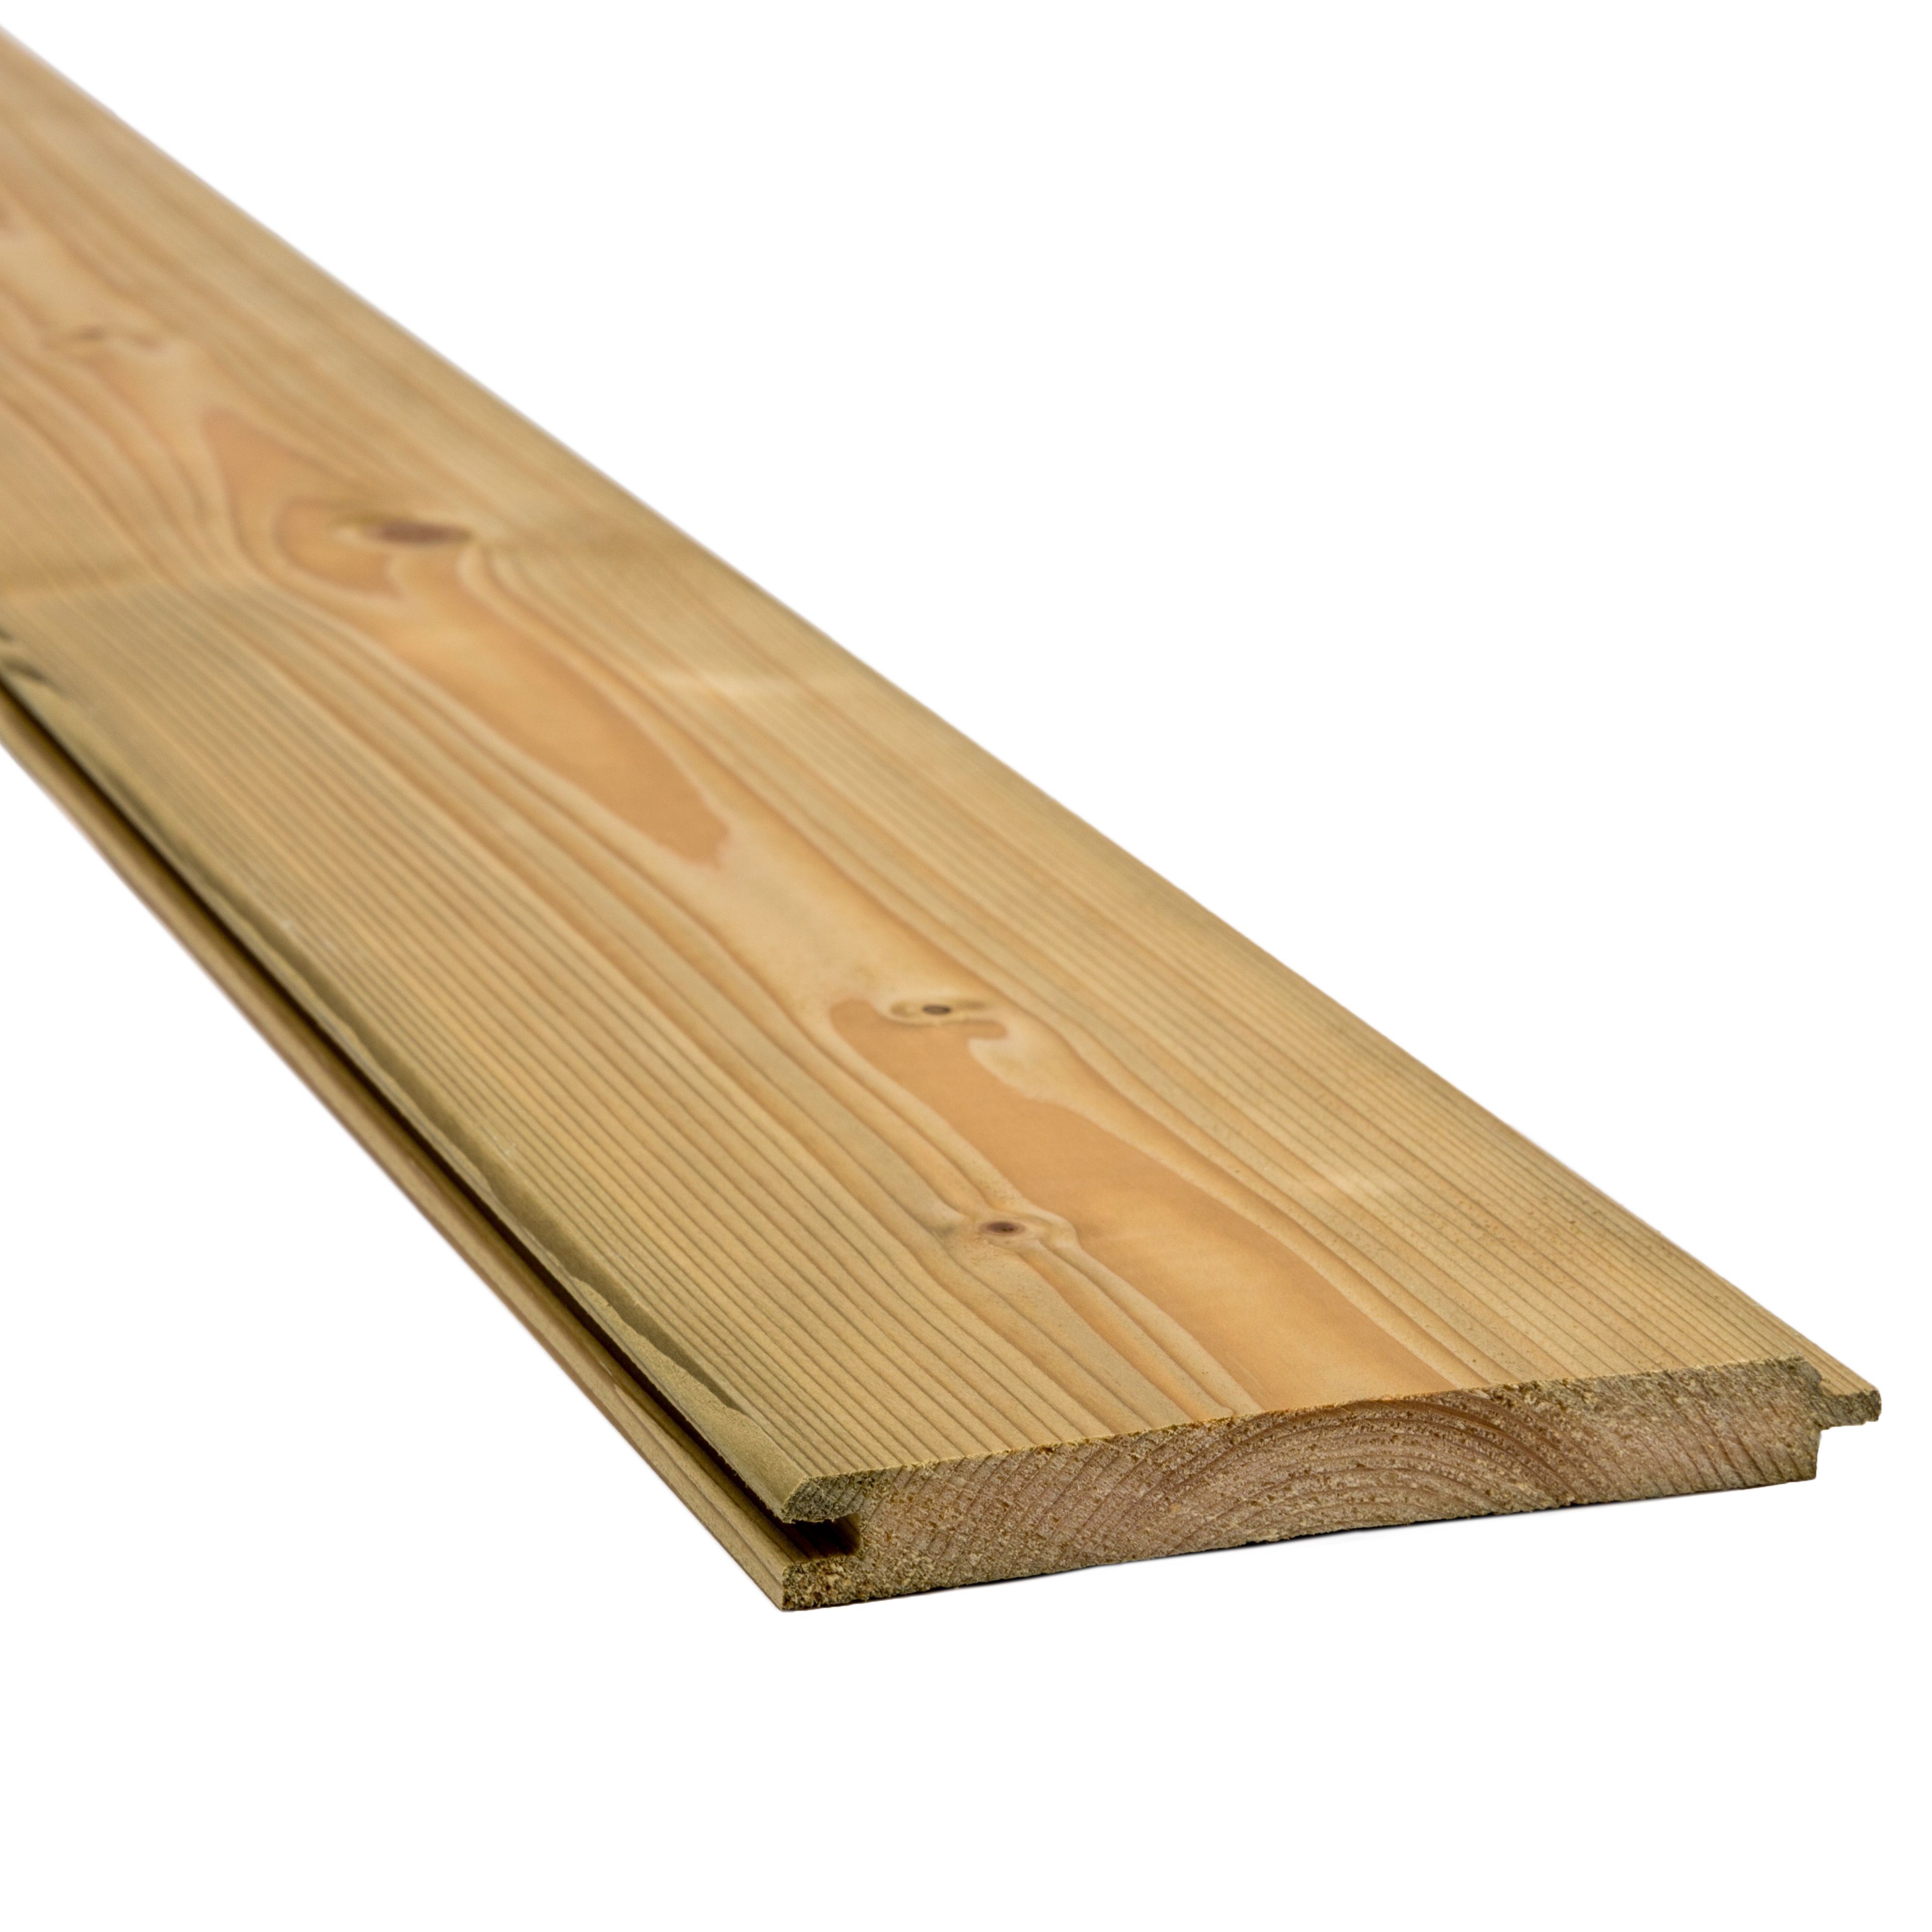 Planed Spruce Tounge Groove Cladding W 119mm T 14 5mm Departments Diy At B Q